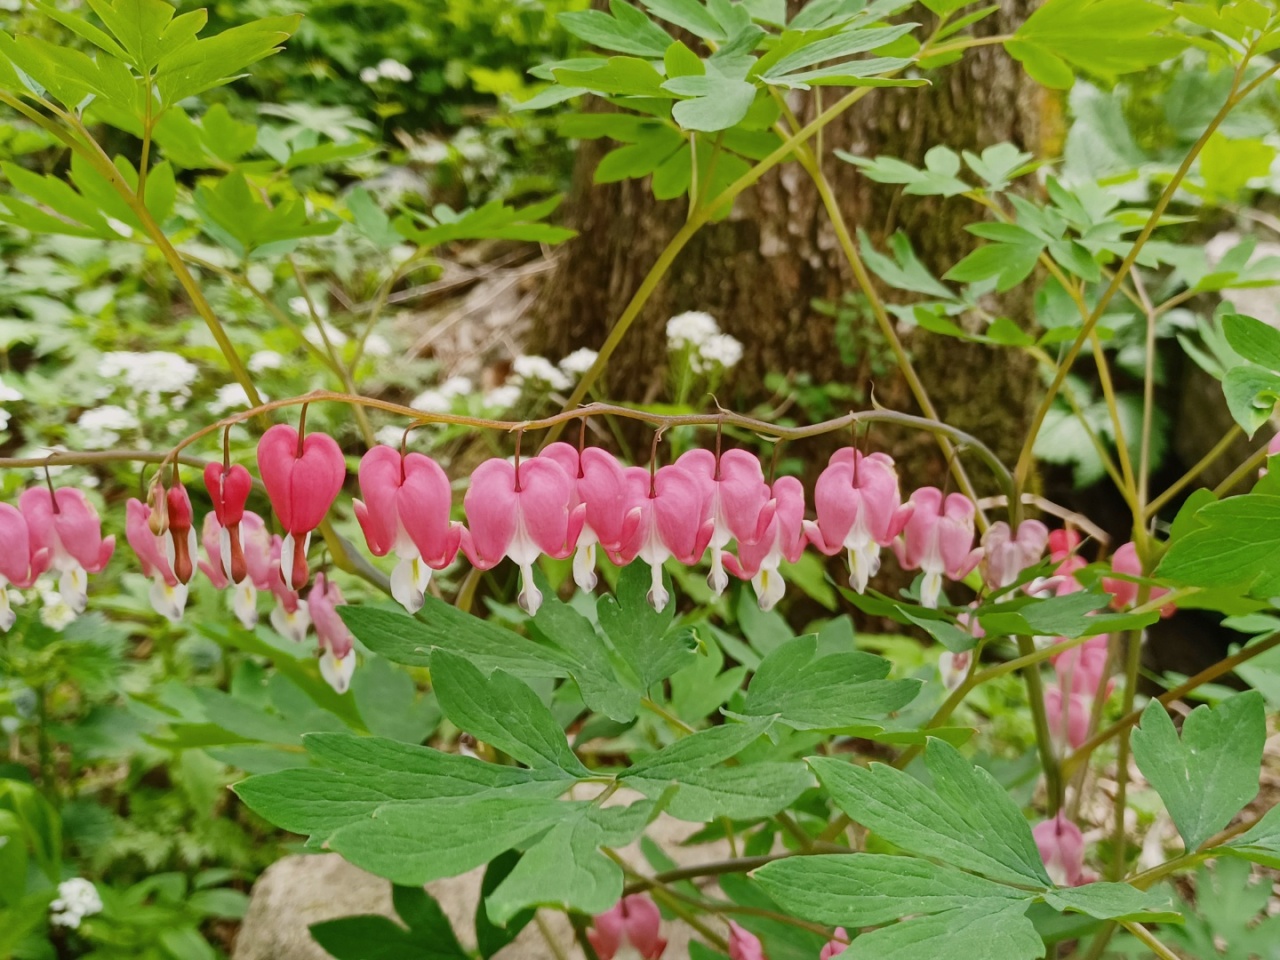 Visitors can see bleeding hearts in full bloom from April to May.  (Lee Si-jin/The Korea Herald)